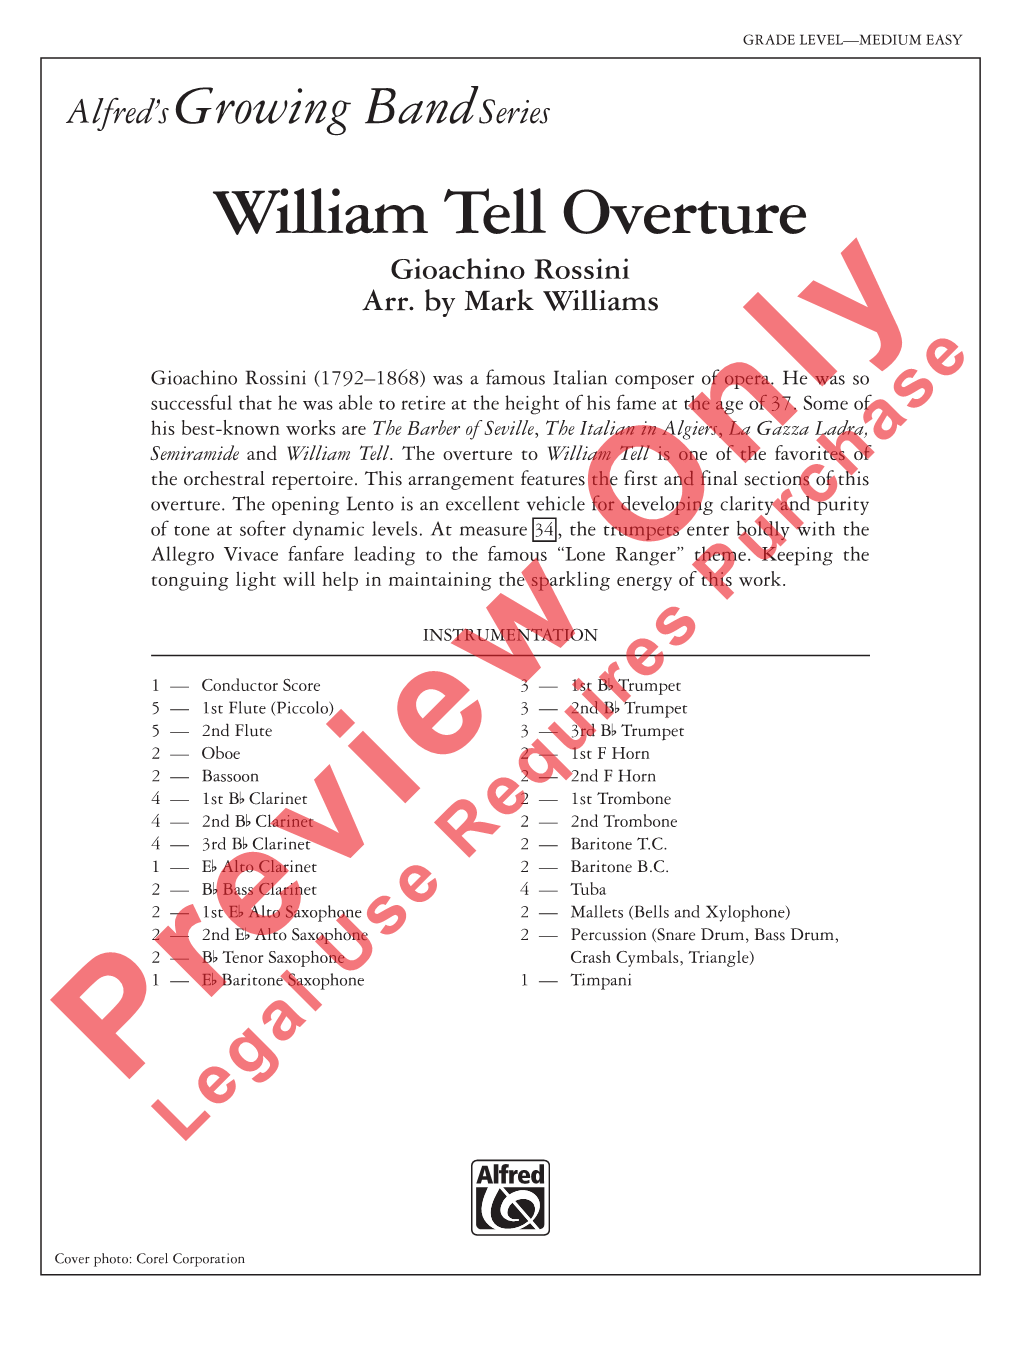 William Tell Overture Legal Use Requires Purchase